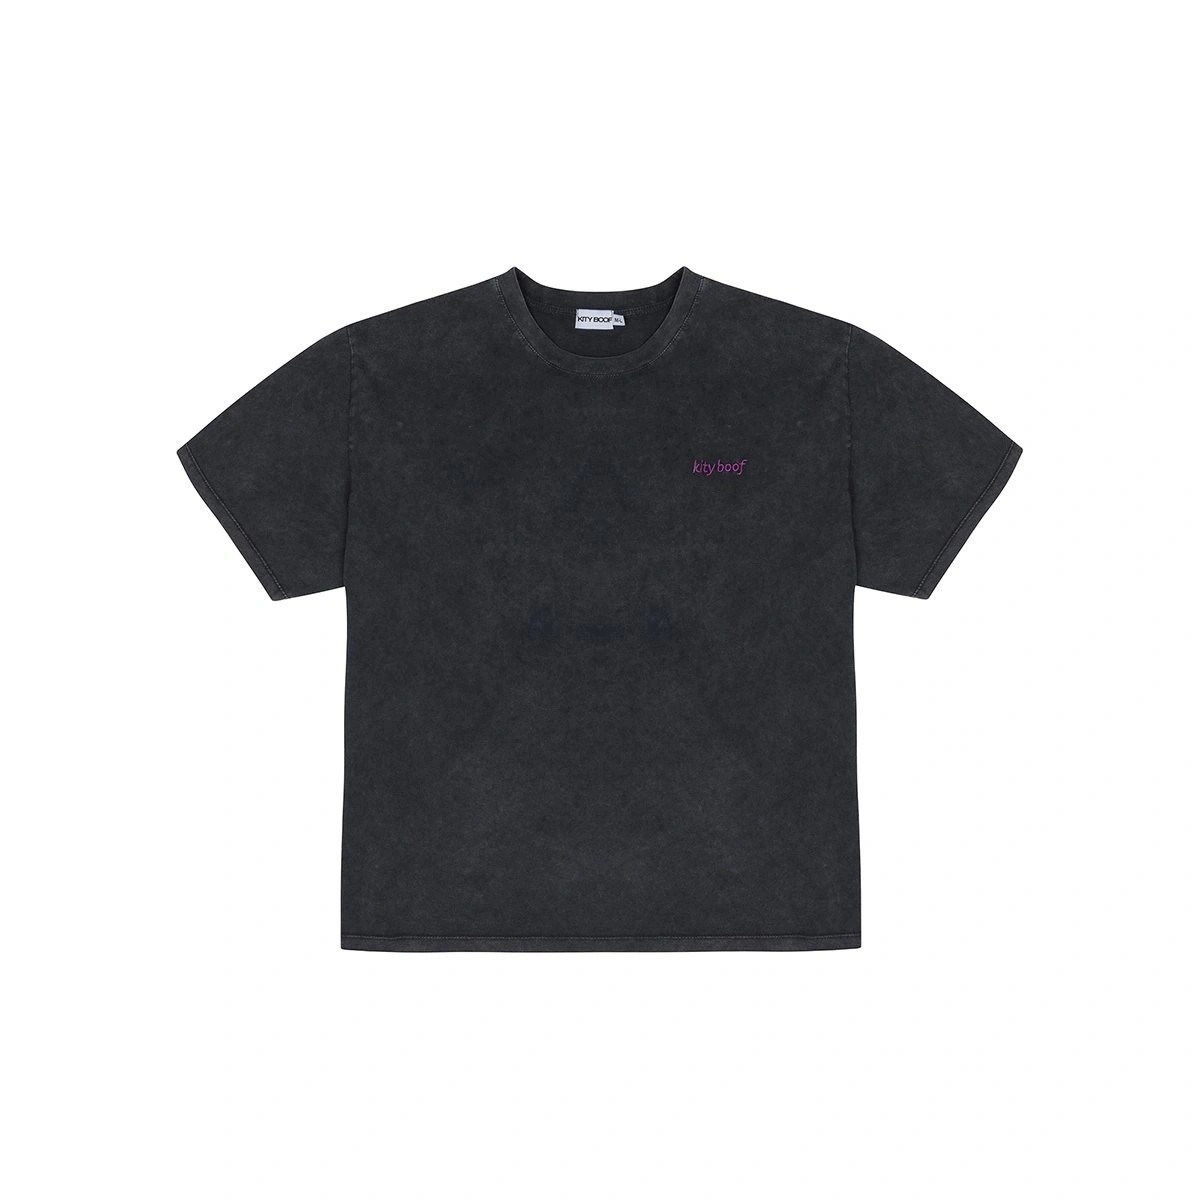 Kity Boof T-Shirt Washed Grey